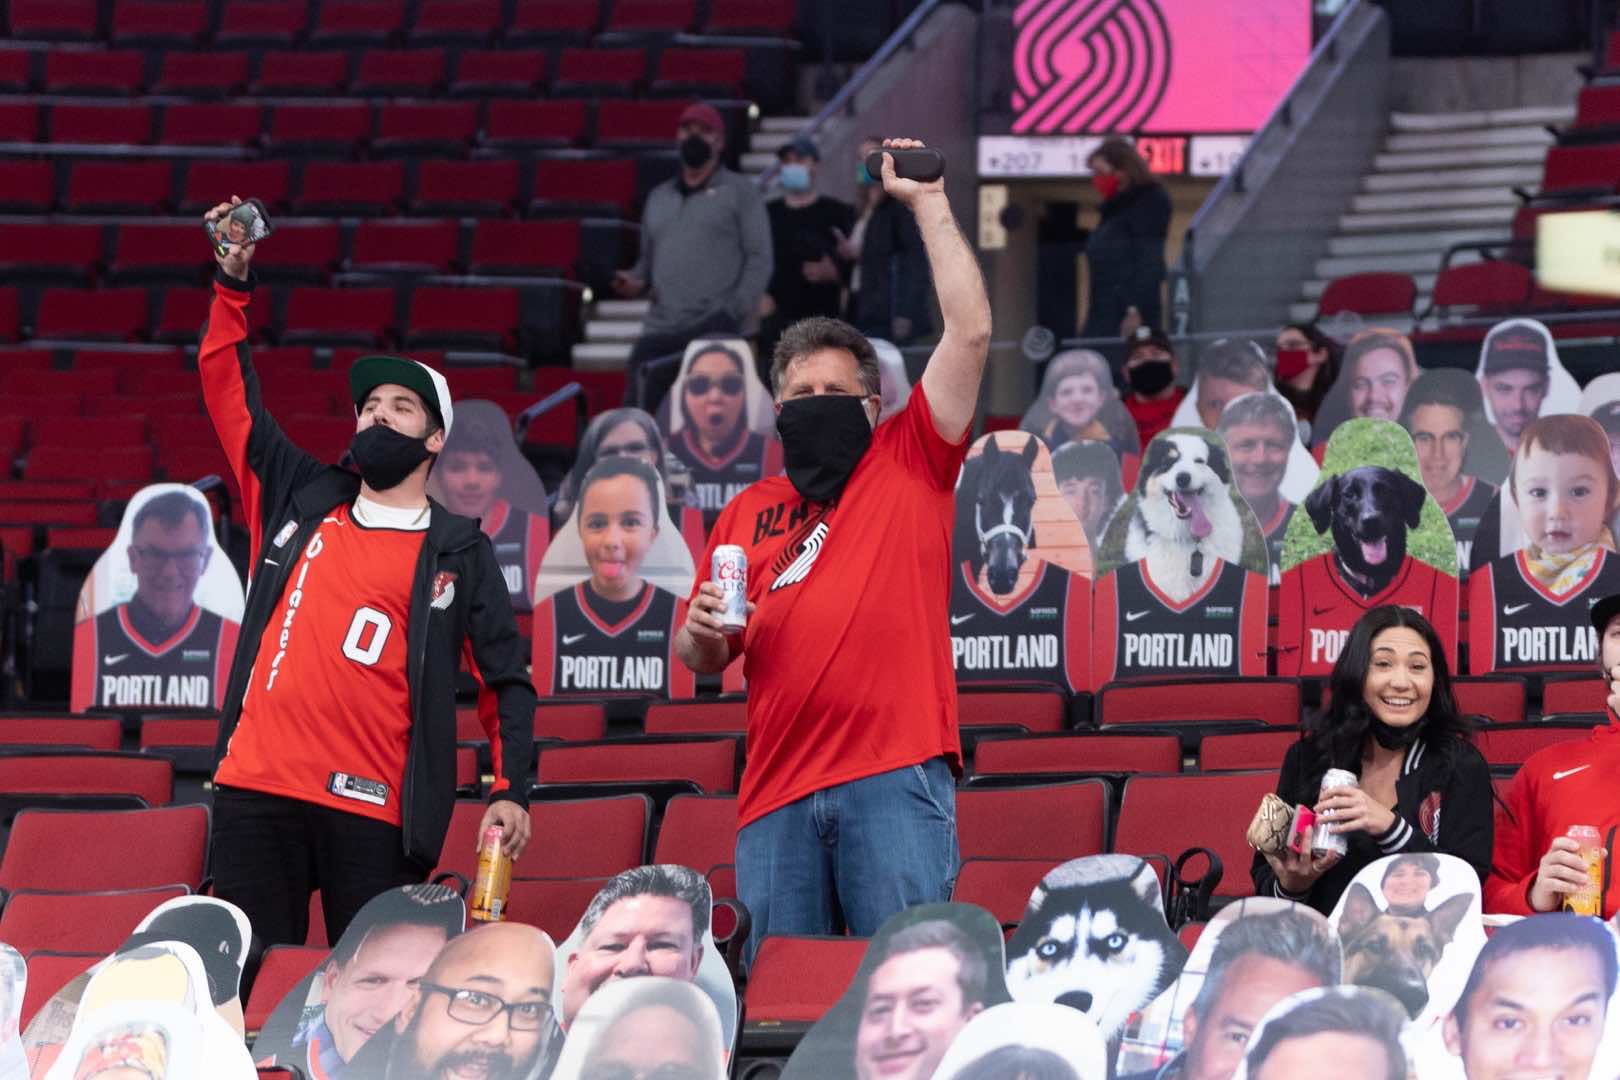 Trail Blazers welcome back fans to Moda Center starting May 7